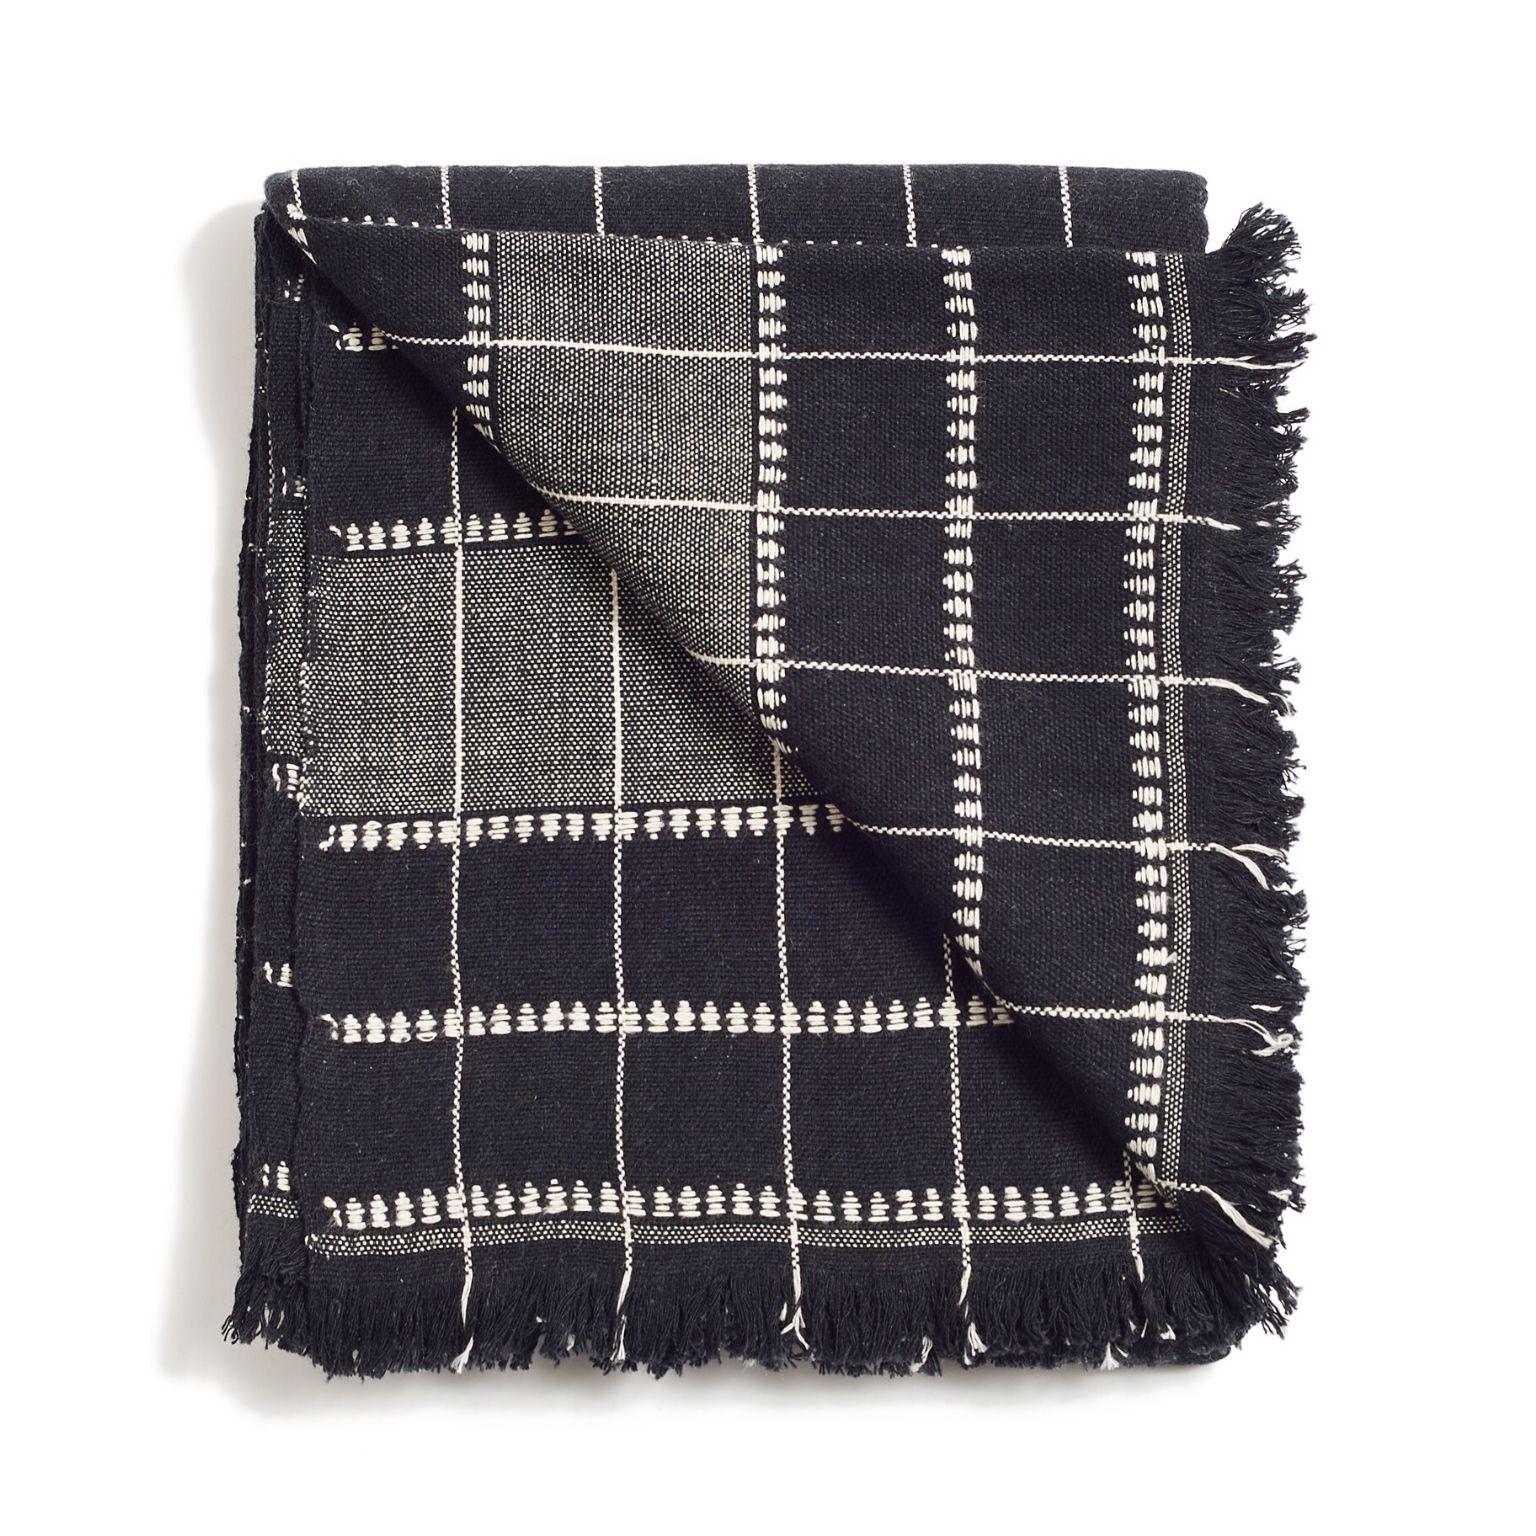 Charco  Handloom Throw / Blanket , Charcoal Black Organic Cotton Checks Pattern  In New Condition For Sale In Bloomfield Hills, MI